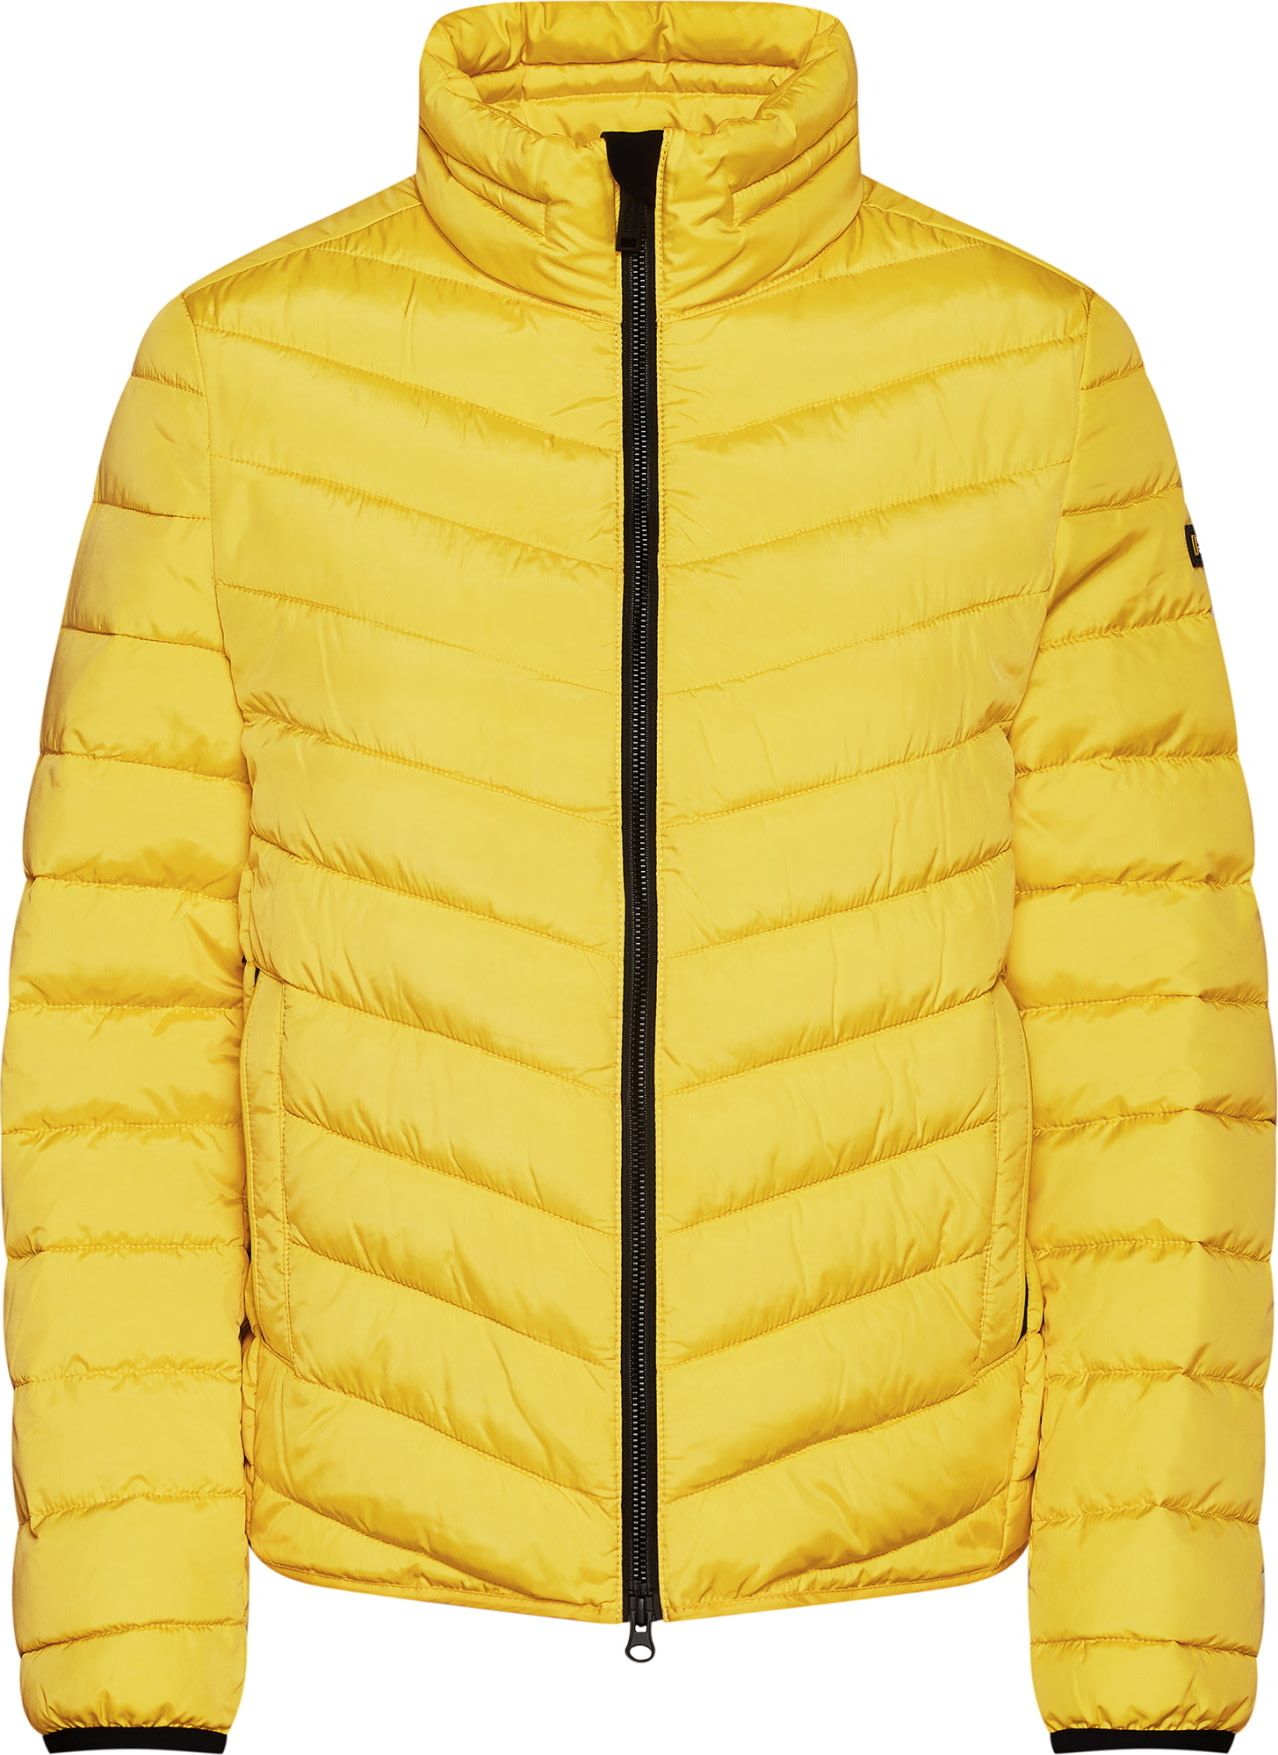 National Geographic Women's Puffer Jacket Light Gold